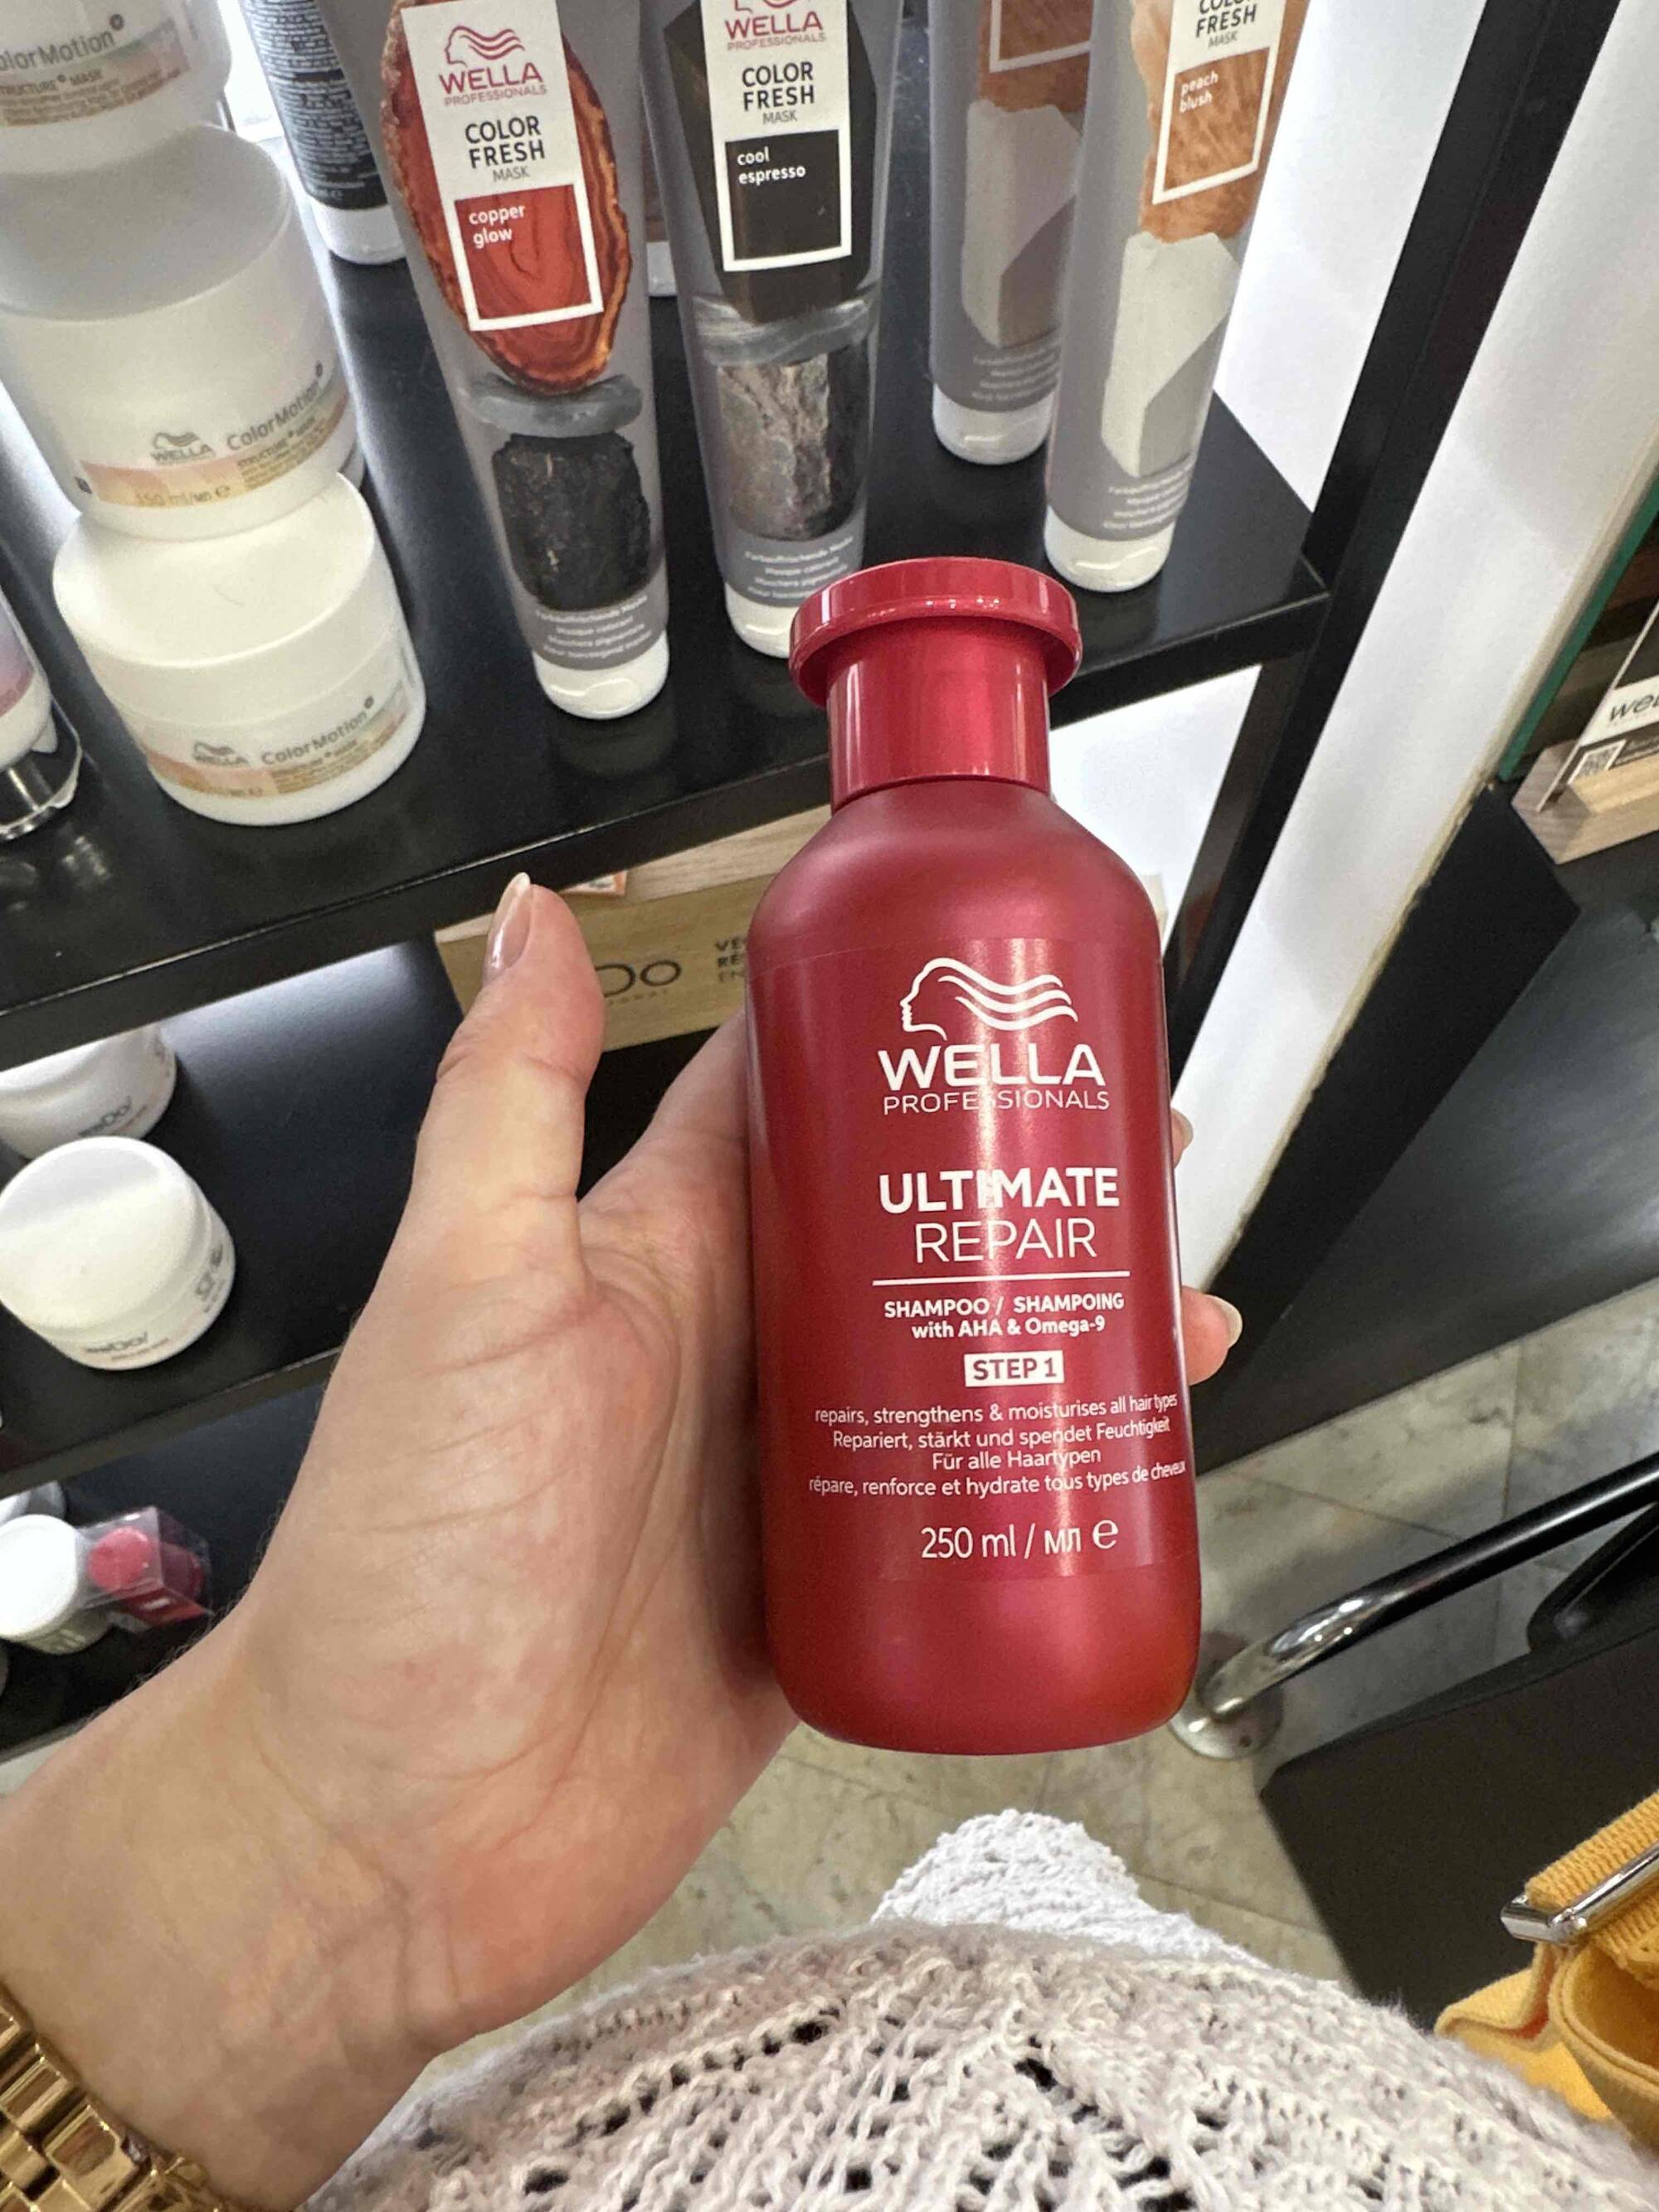 WELLA PROFESSIONALS - Ultimate repair - Shampooing step 1